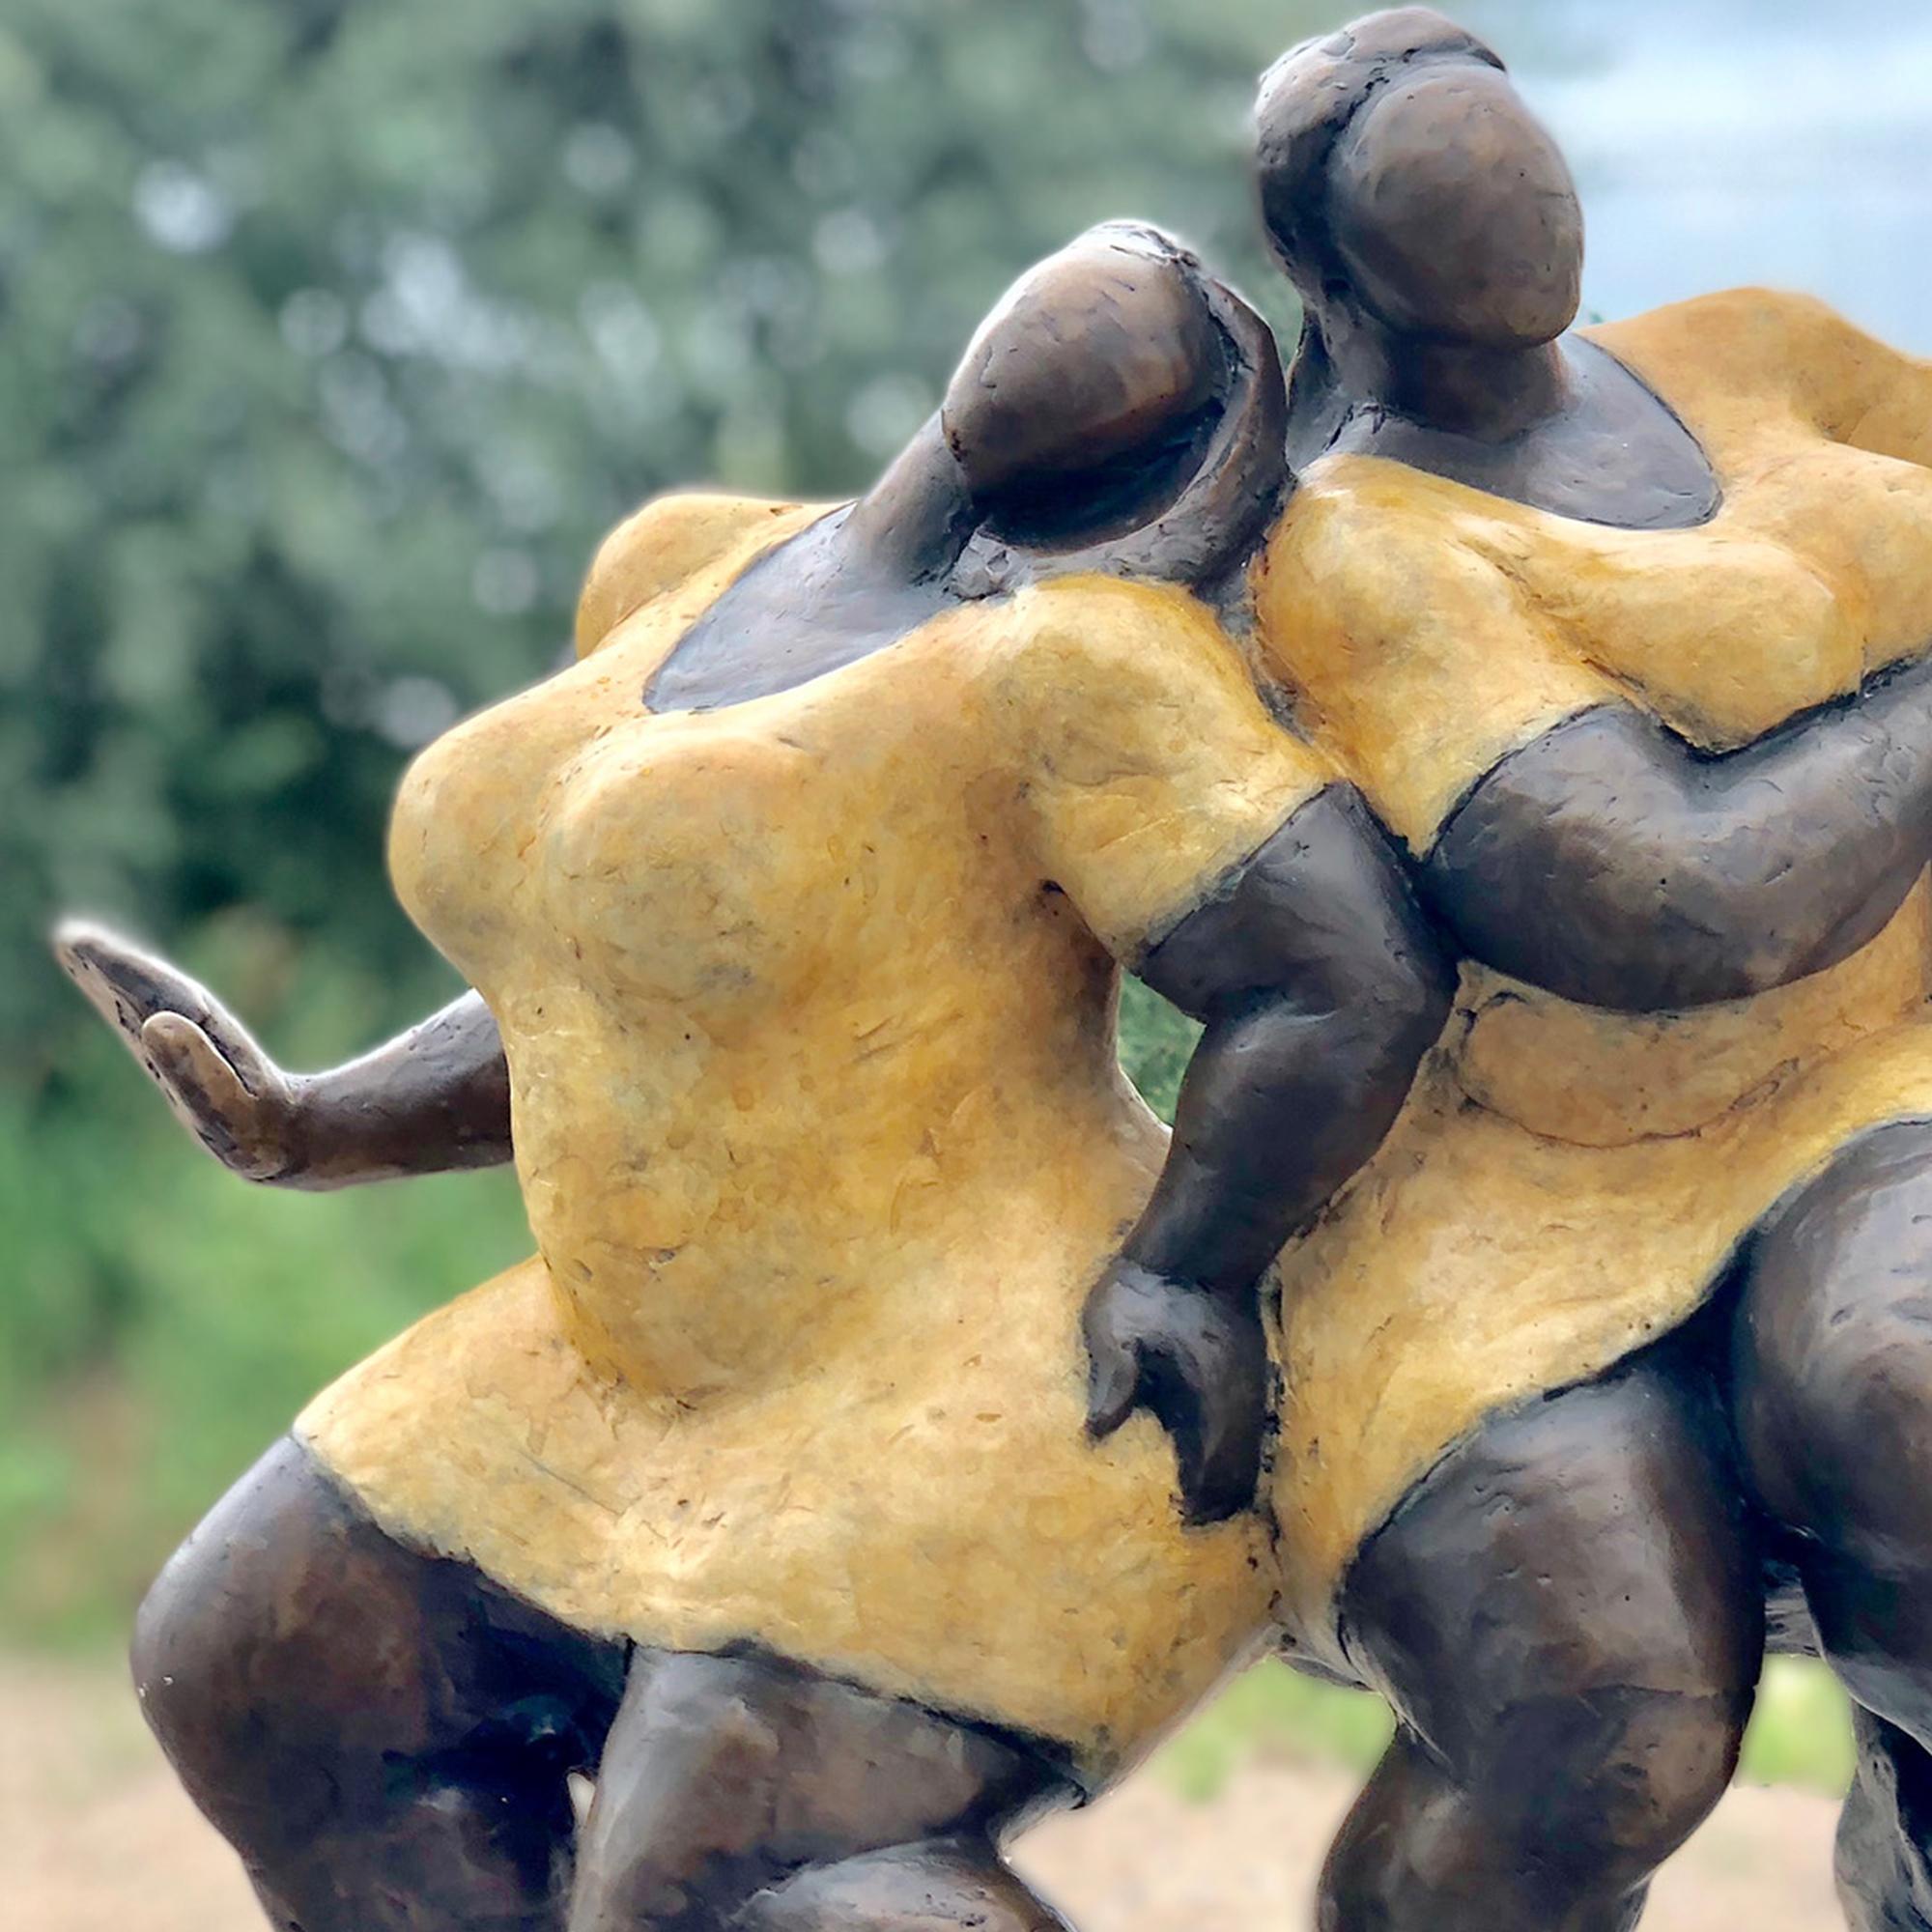 'Joy' Cast Bronze Sculpture with Patina and Lacquer Finish - Gold Figurative Sculpture by Nnamdi Okonkwo